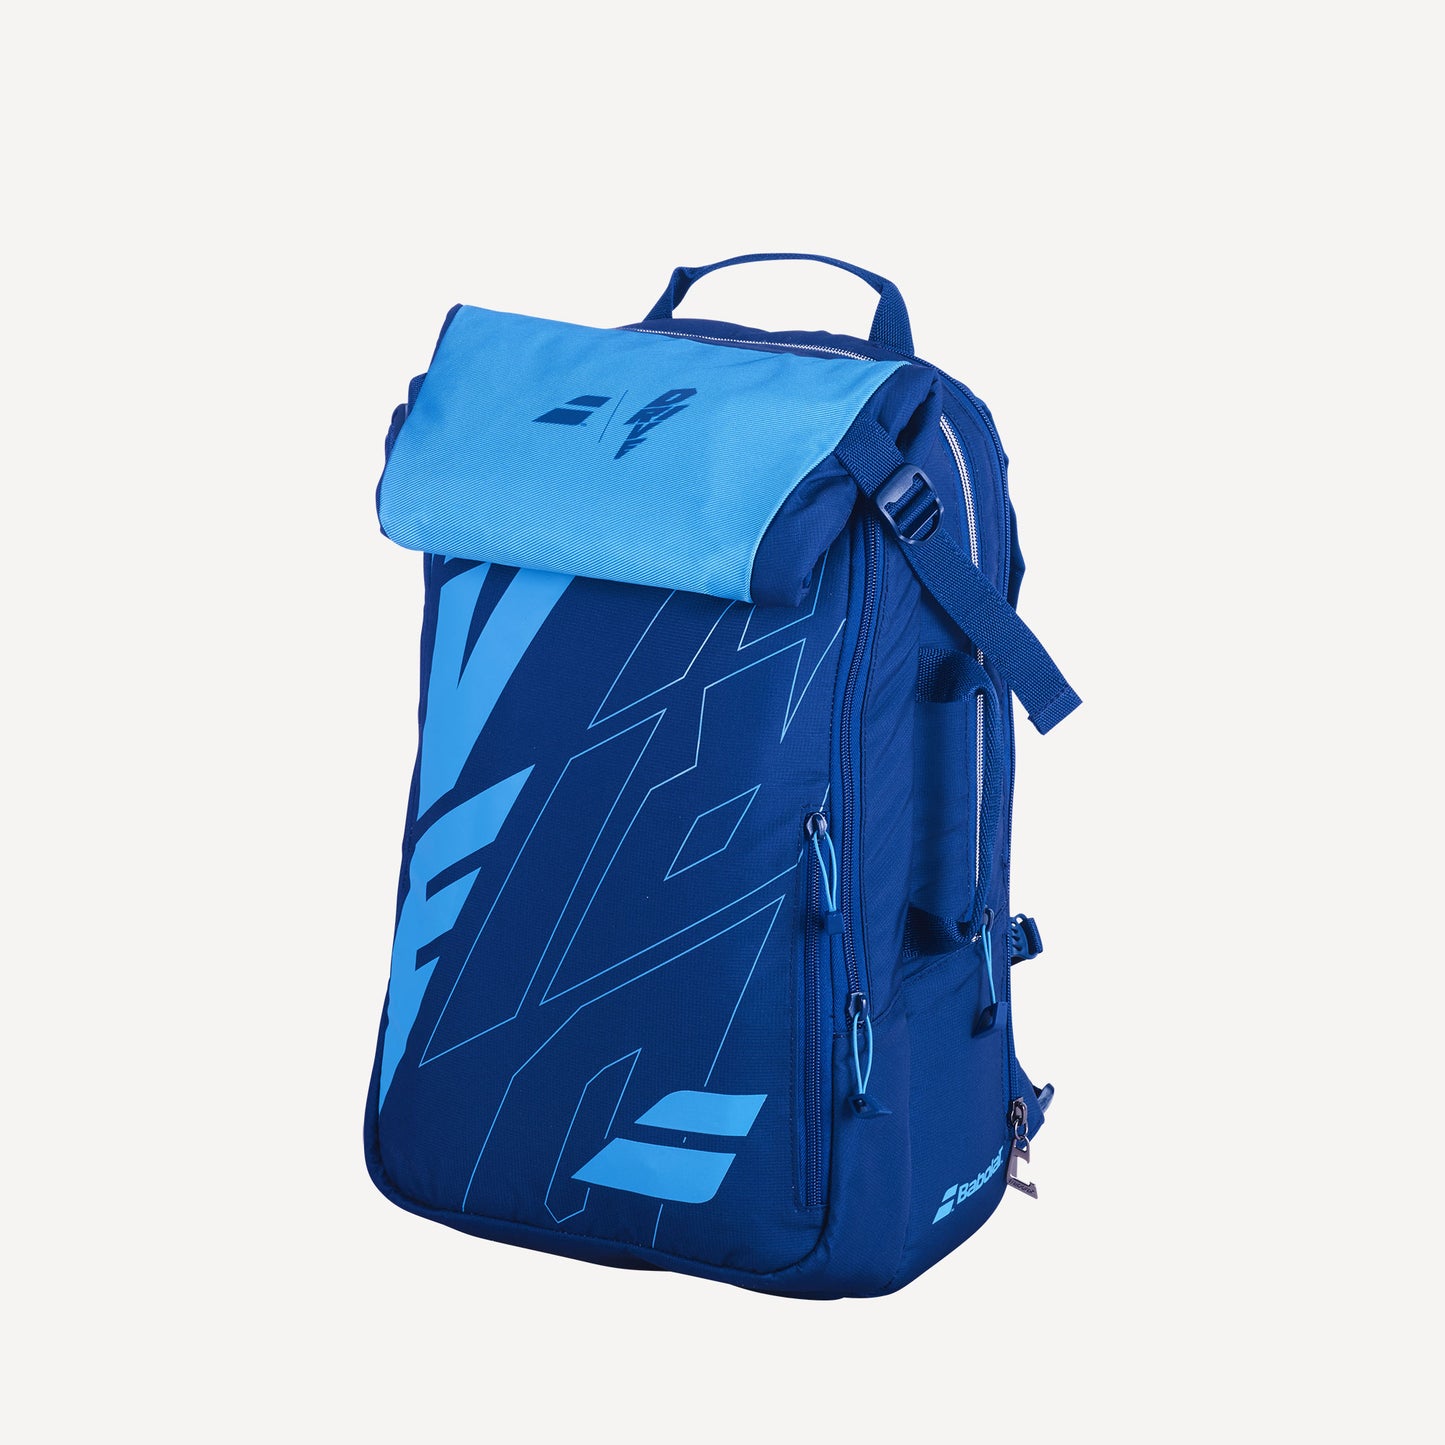 Babolat Pure Drive Tennis Backpack Blue (1)